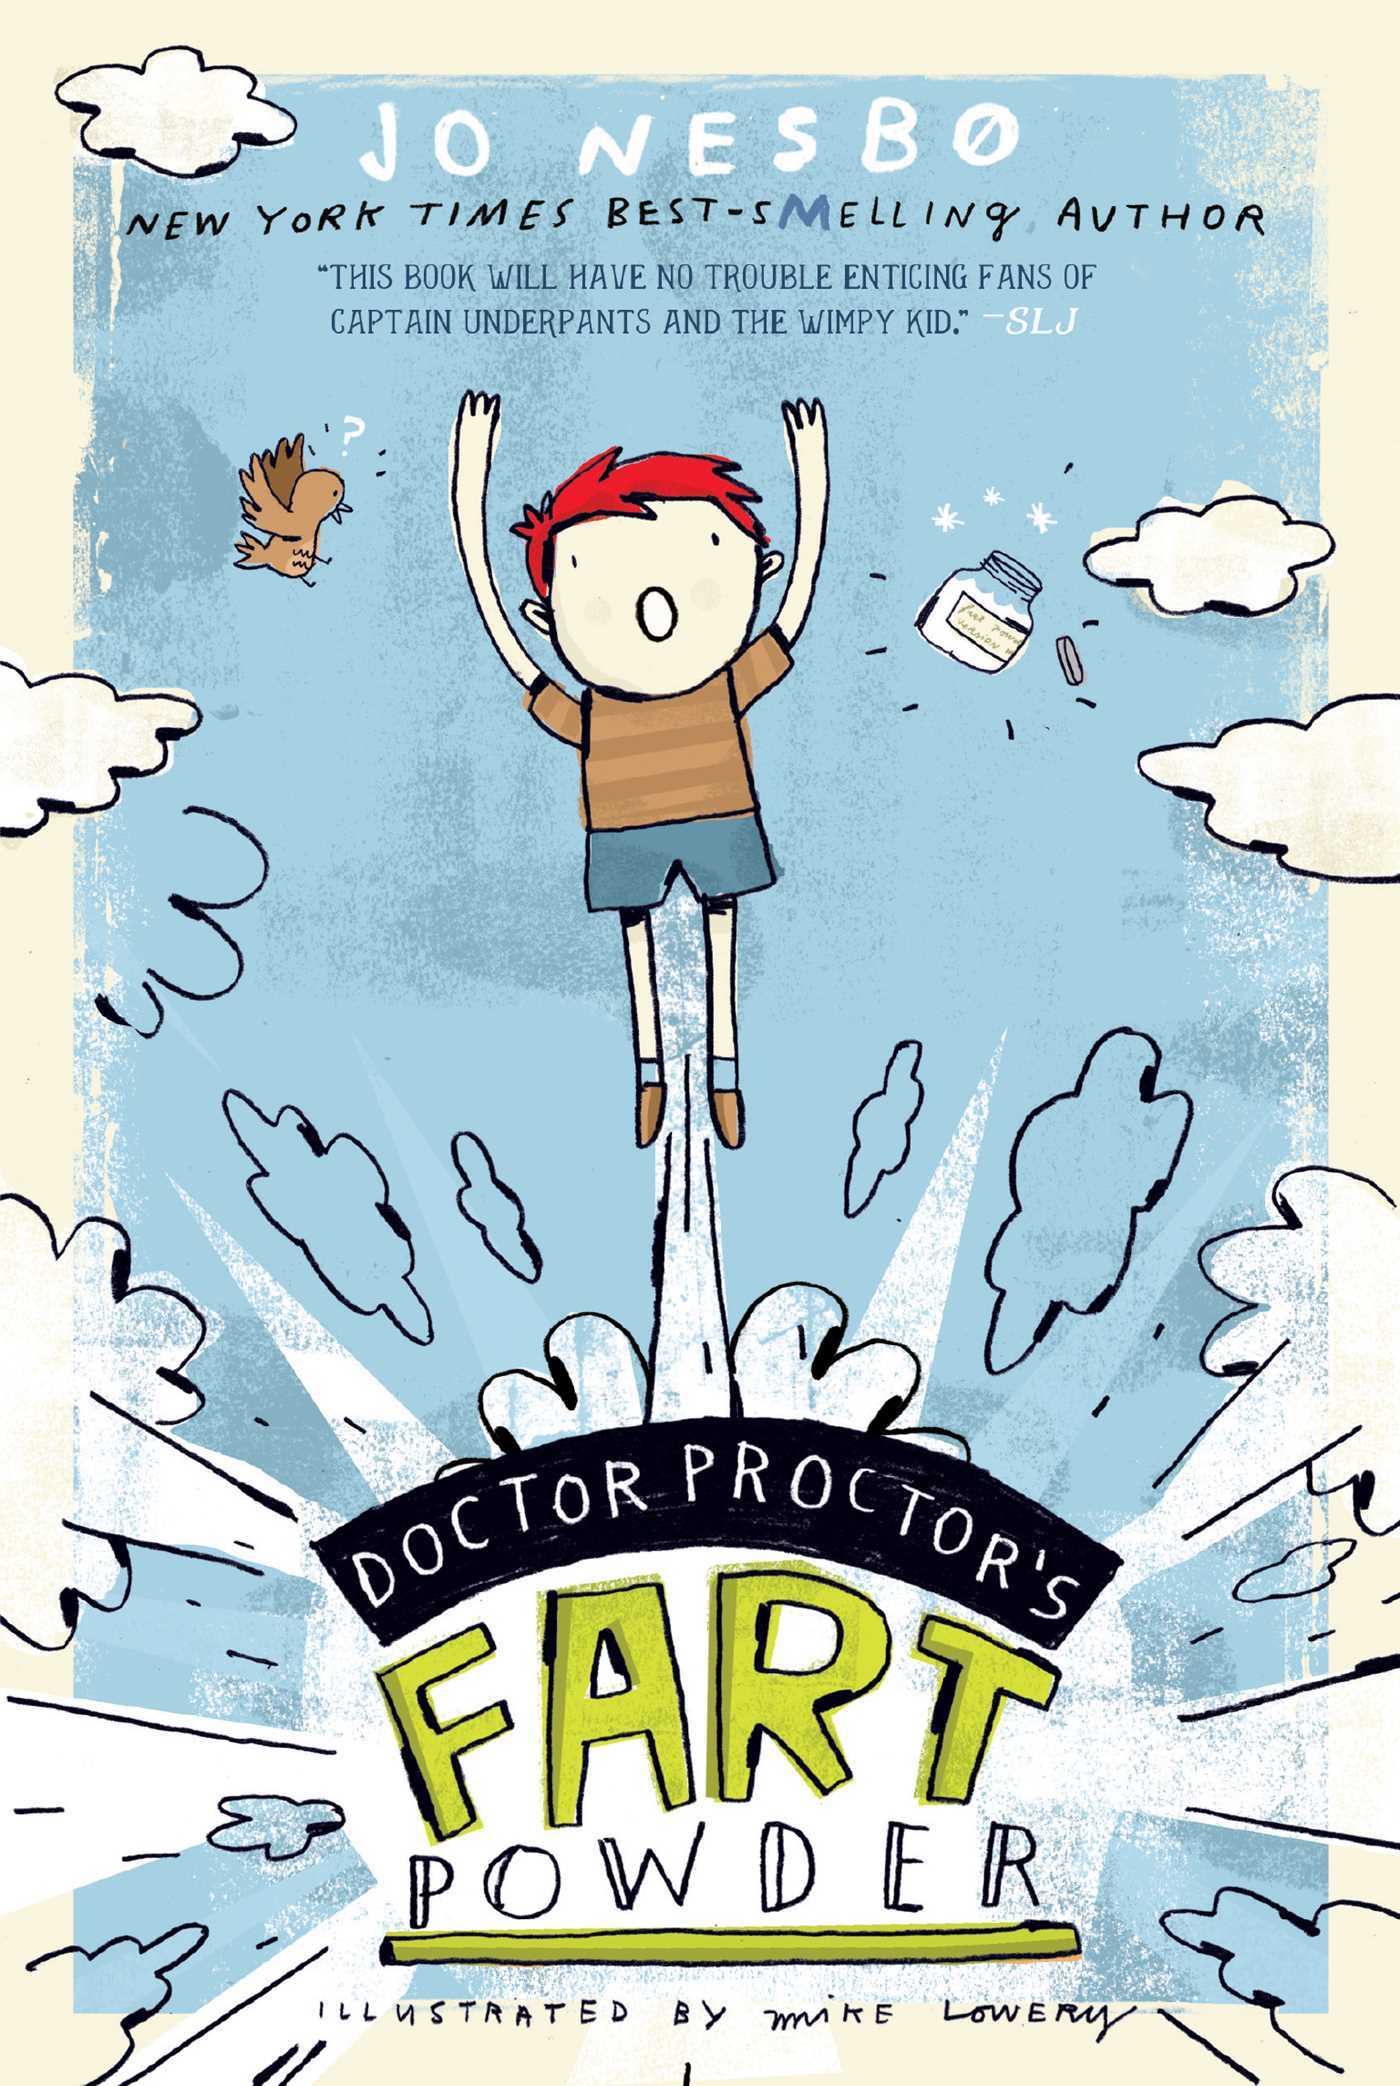 Book cover with title and graphic of a young boy rising above the title on a stream of air with arms above his head and a surprised face.